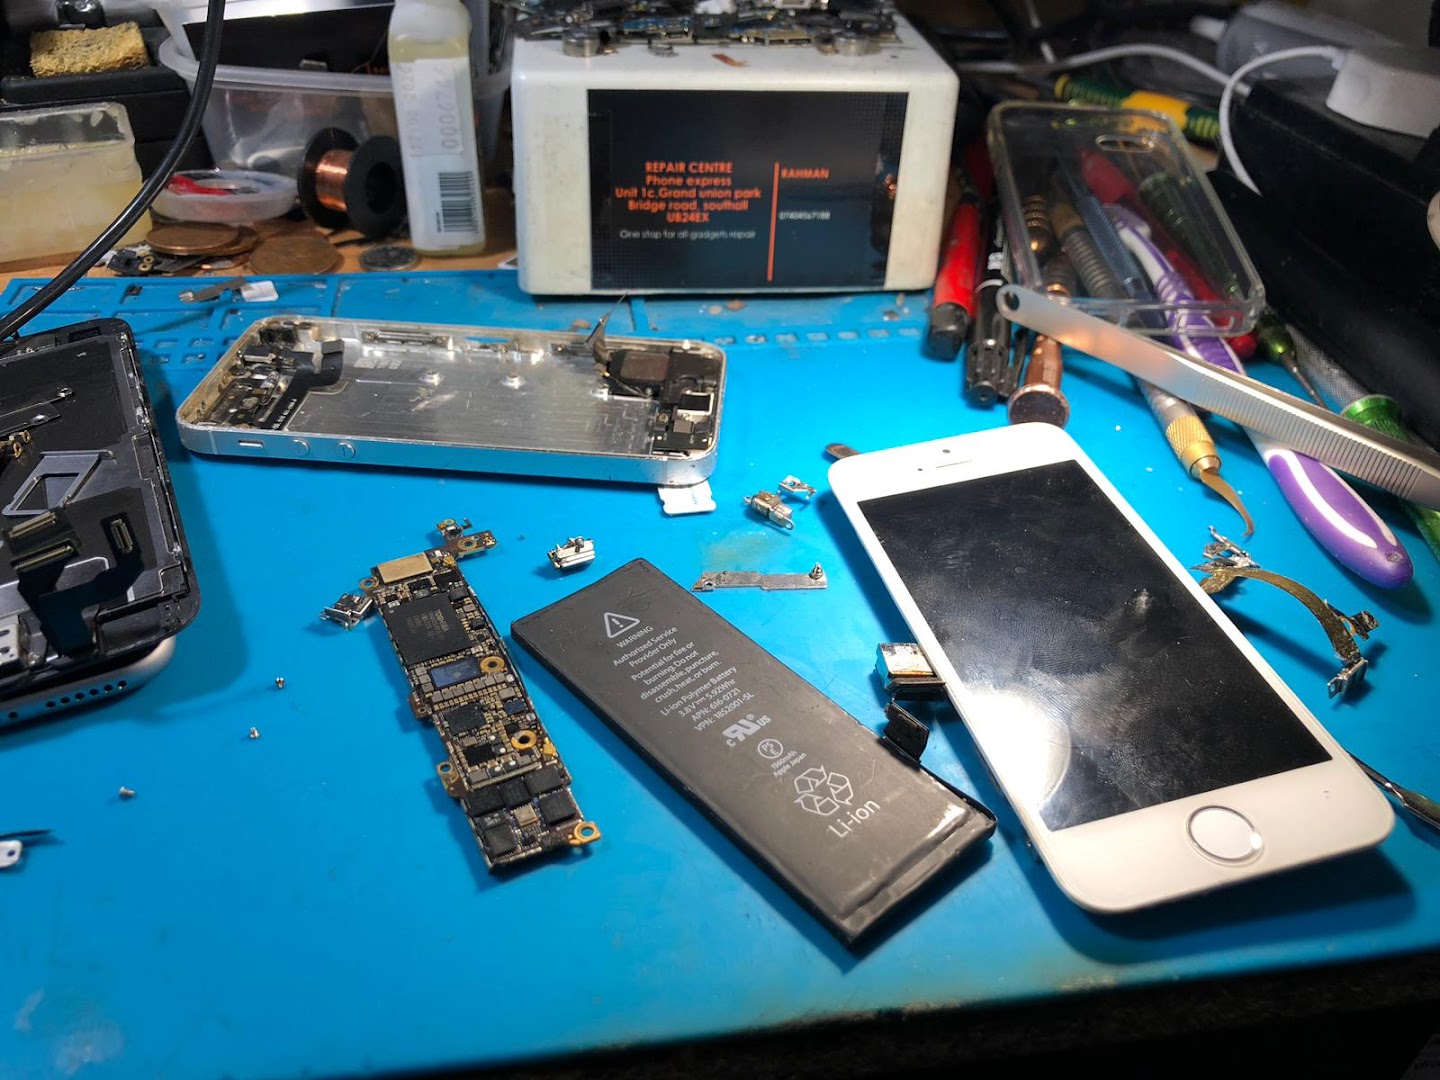 Restoring Your Device to Perfection